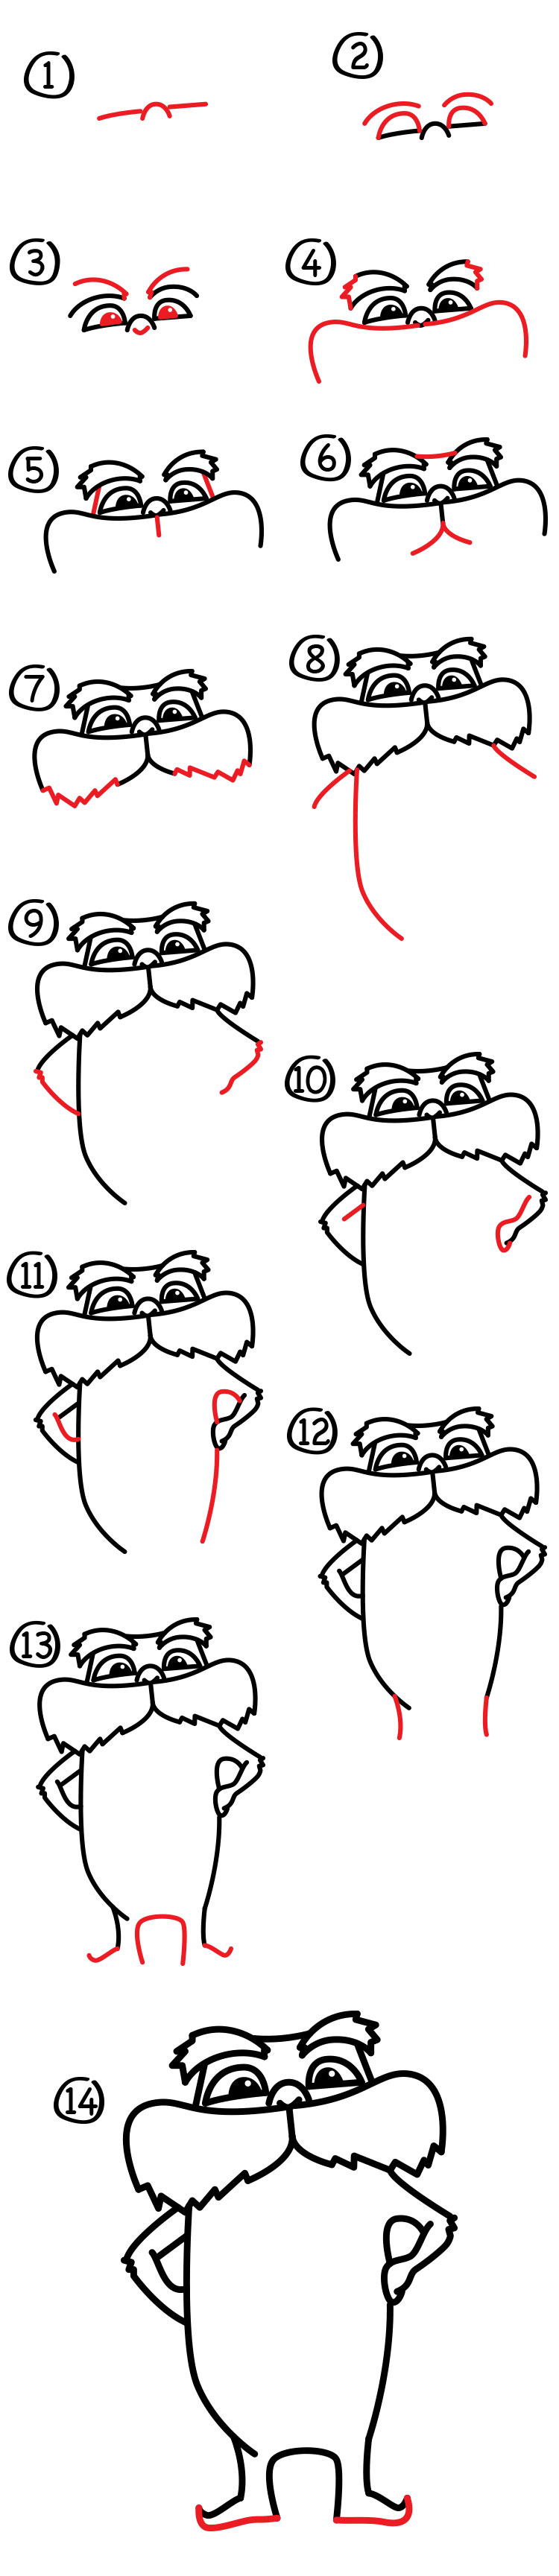 How To Draw The Lorax + Giveaway! - Art For Kids Hub